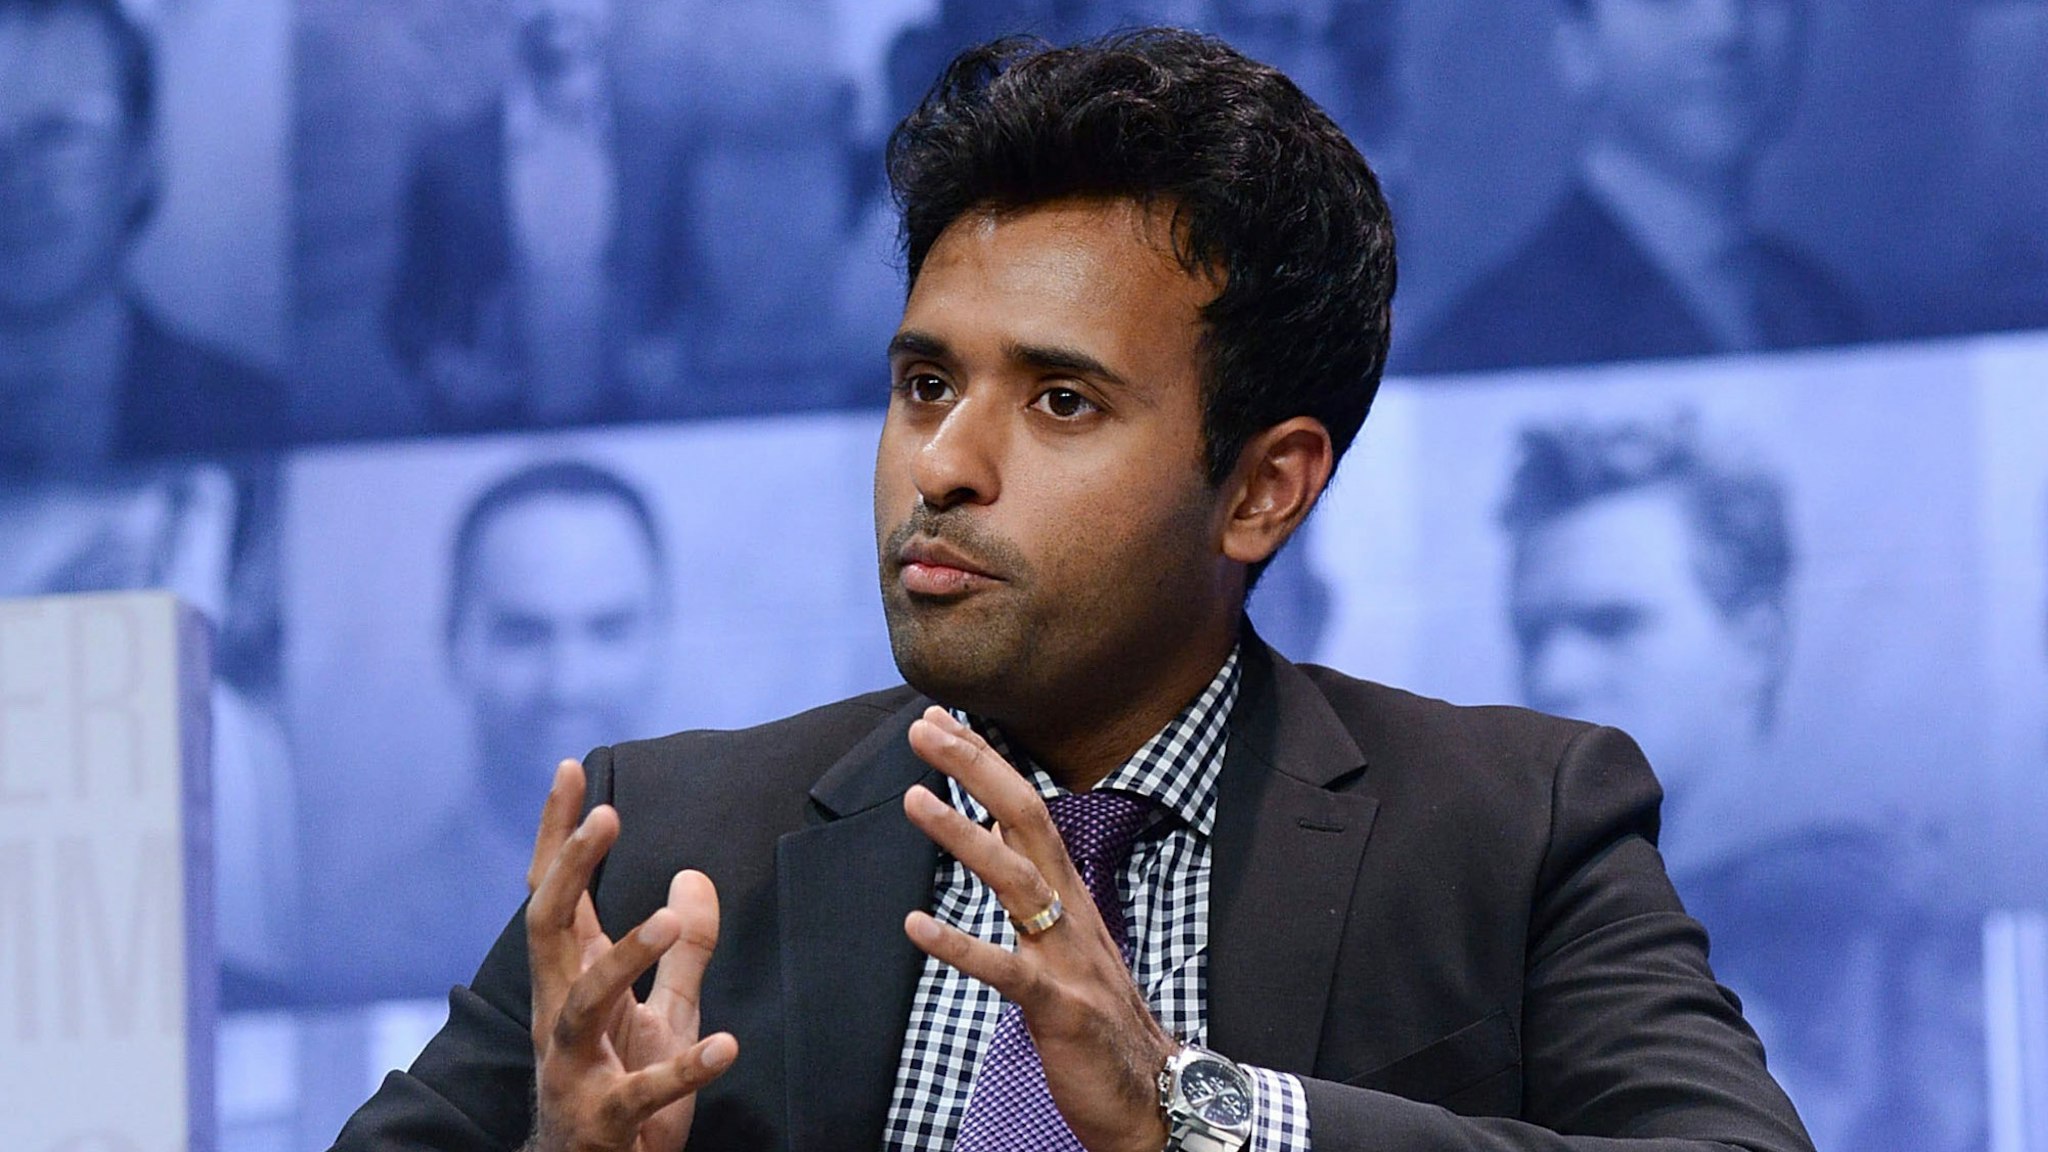 Vivek Ramaswamy, Founder & CEO of Rolvant Sciences speaks at Forbes Under 30 Summit at Pennsylvania Convention Center on October 5, 2015 in Philadelphia, Pennsylvania.